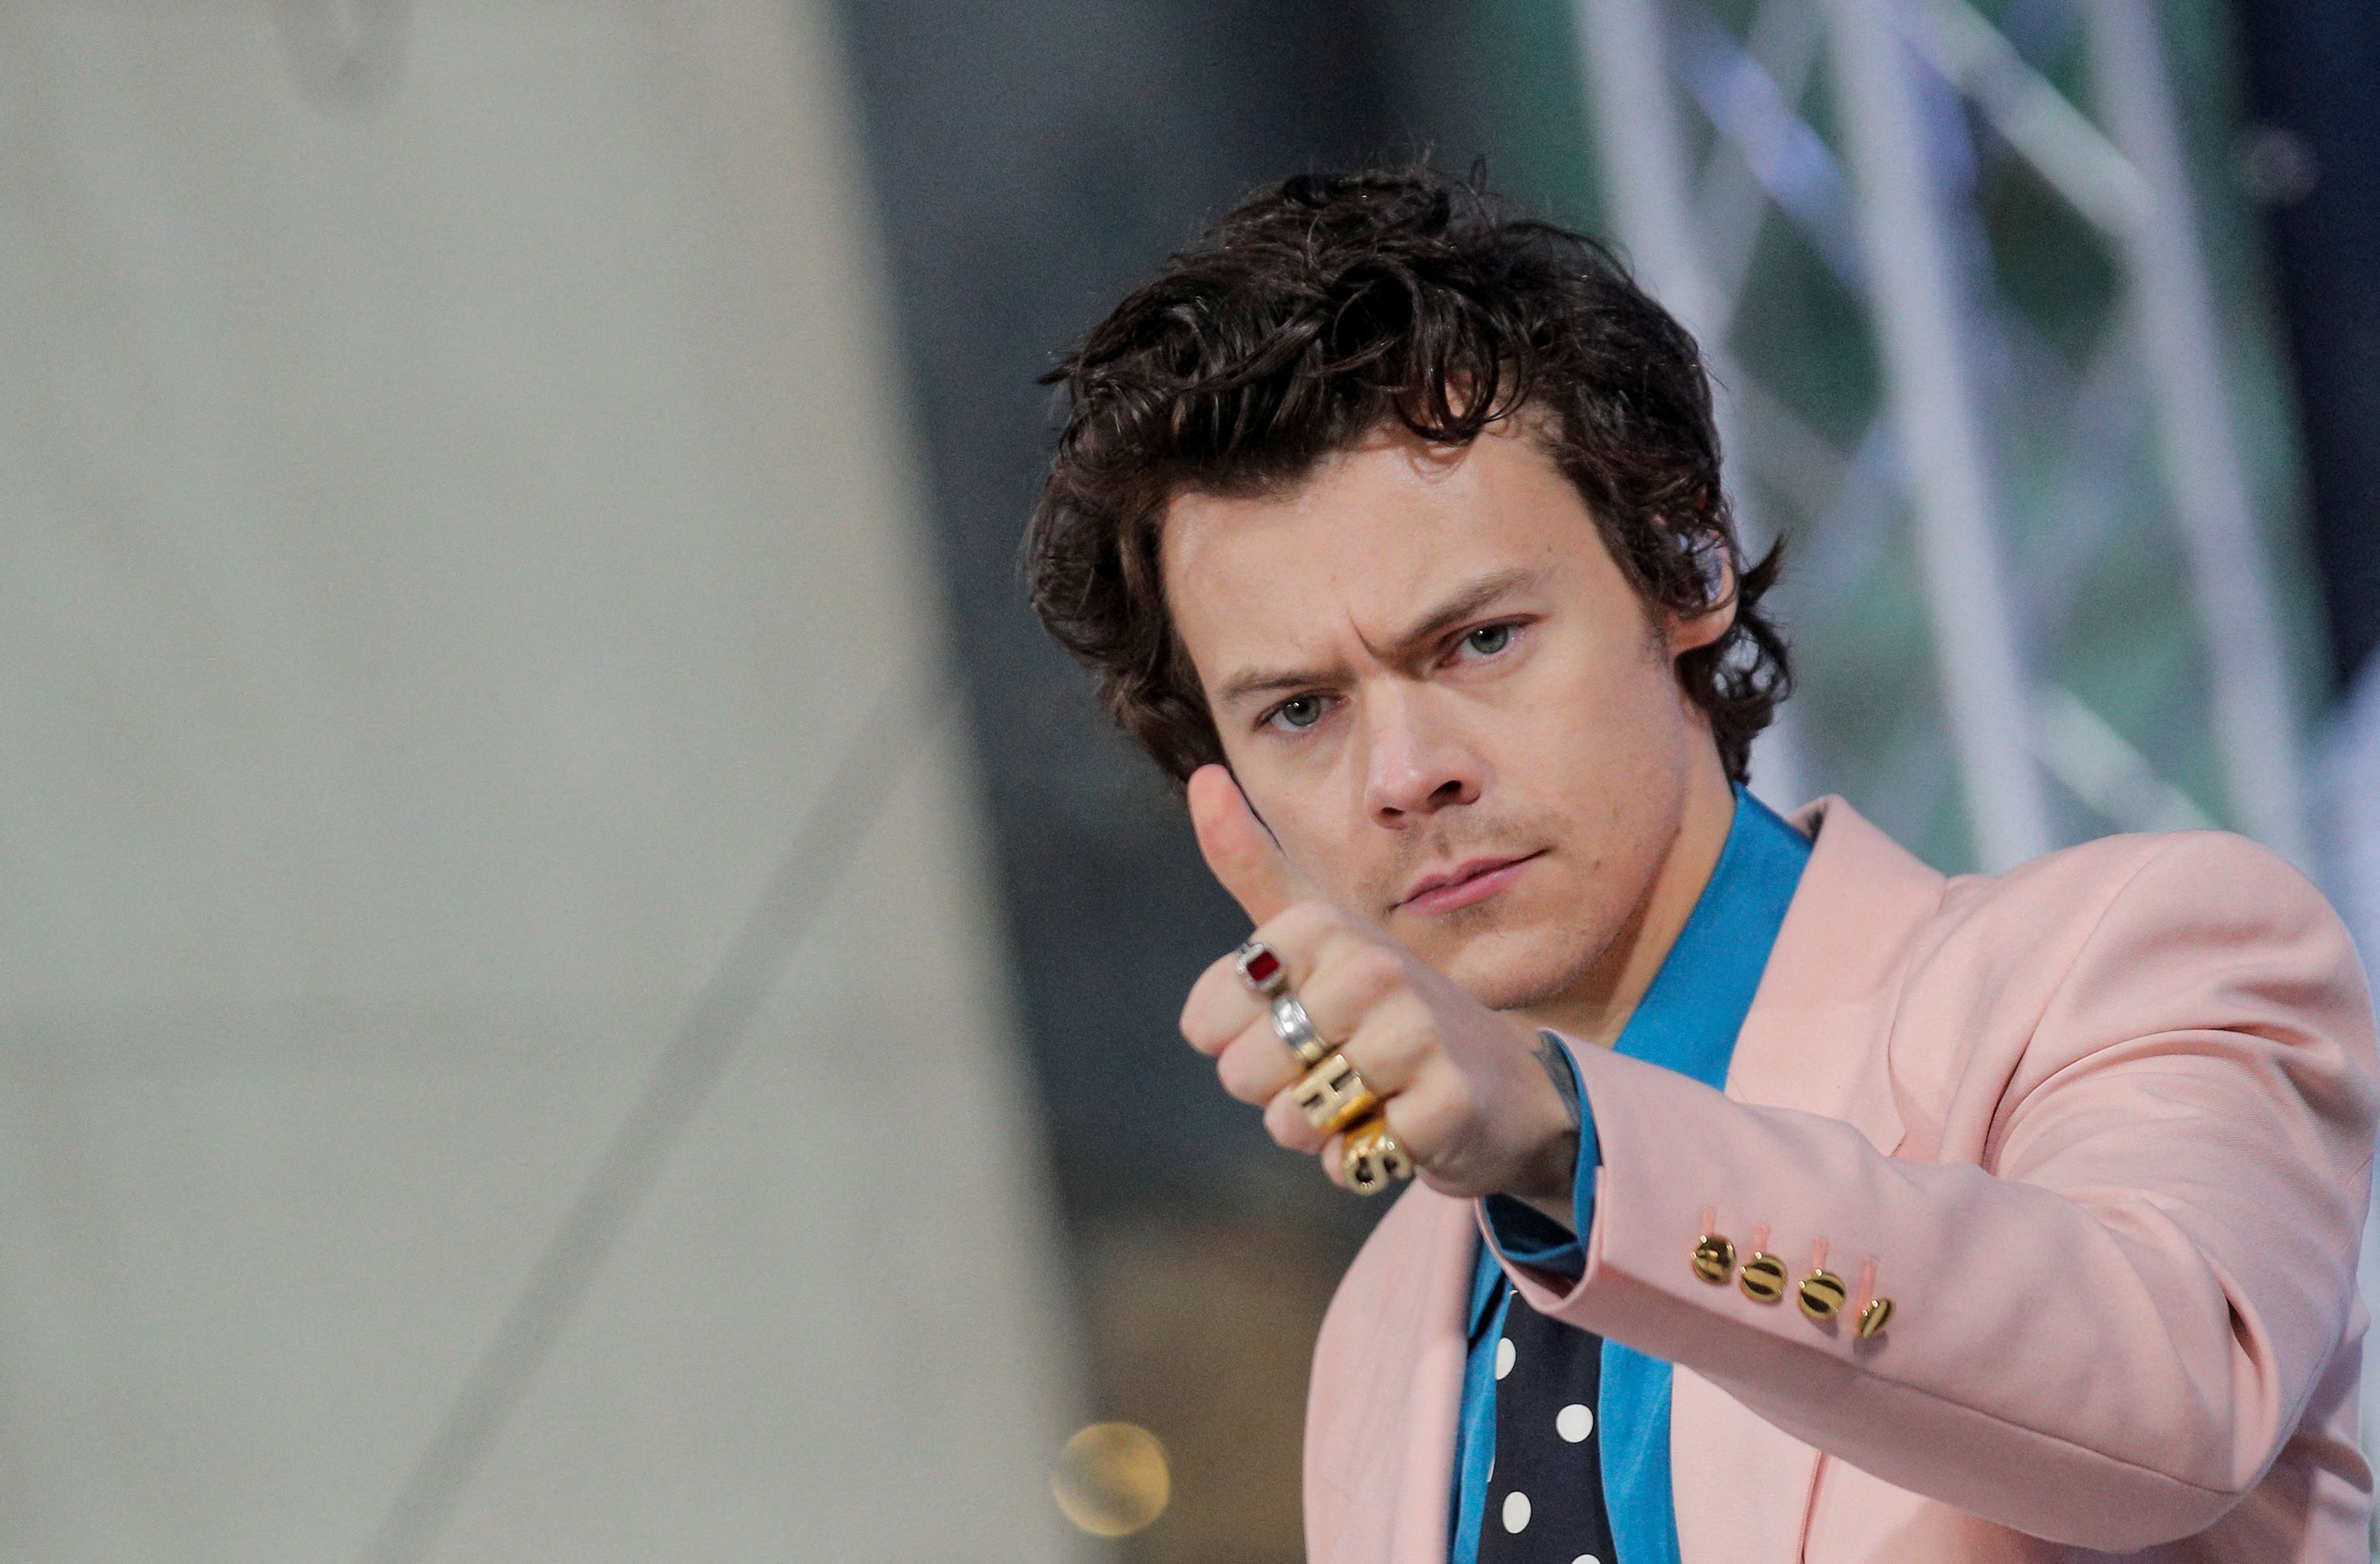 Singer Harry Styles performs on NBC's 'Today' show in New York City, U.S., February 26, 2020. REUTERS/Brendan McDermid